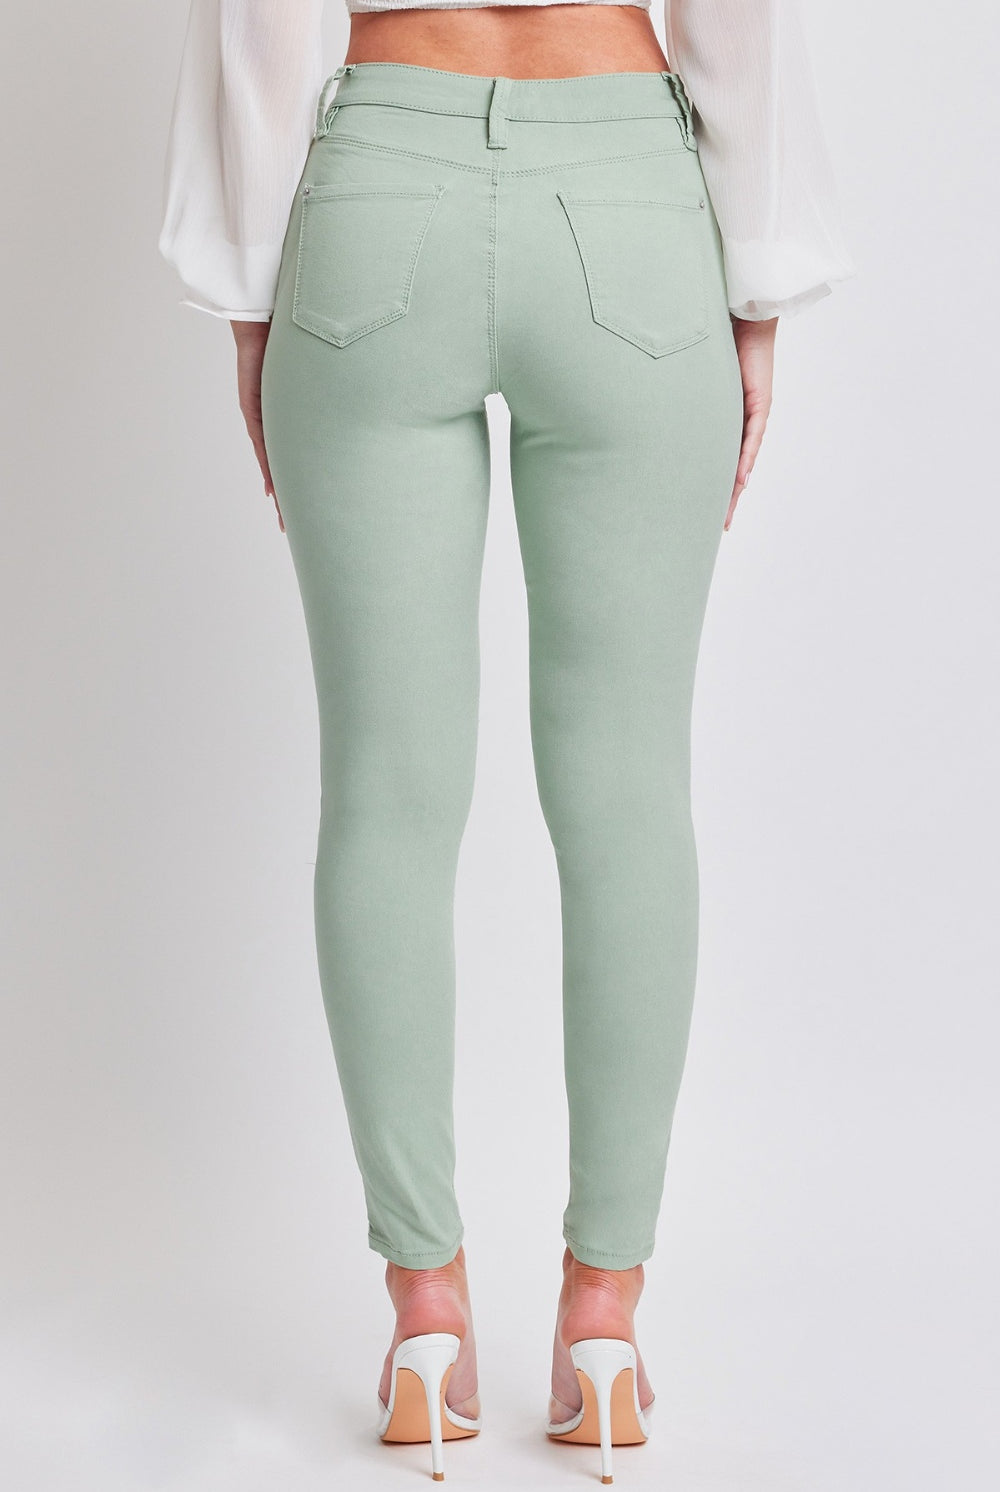 Model wearing stylish jade green mid-rise skinny jeans, exuding confidence and trendy vibes.